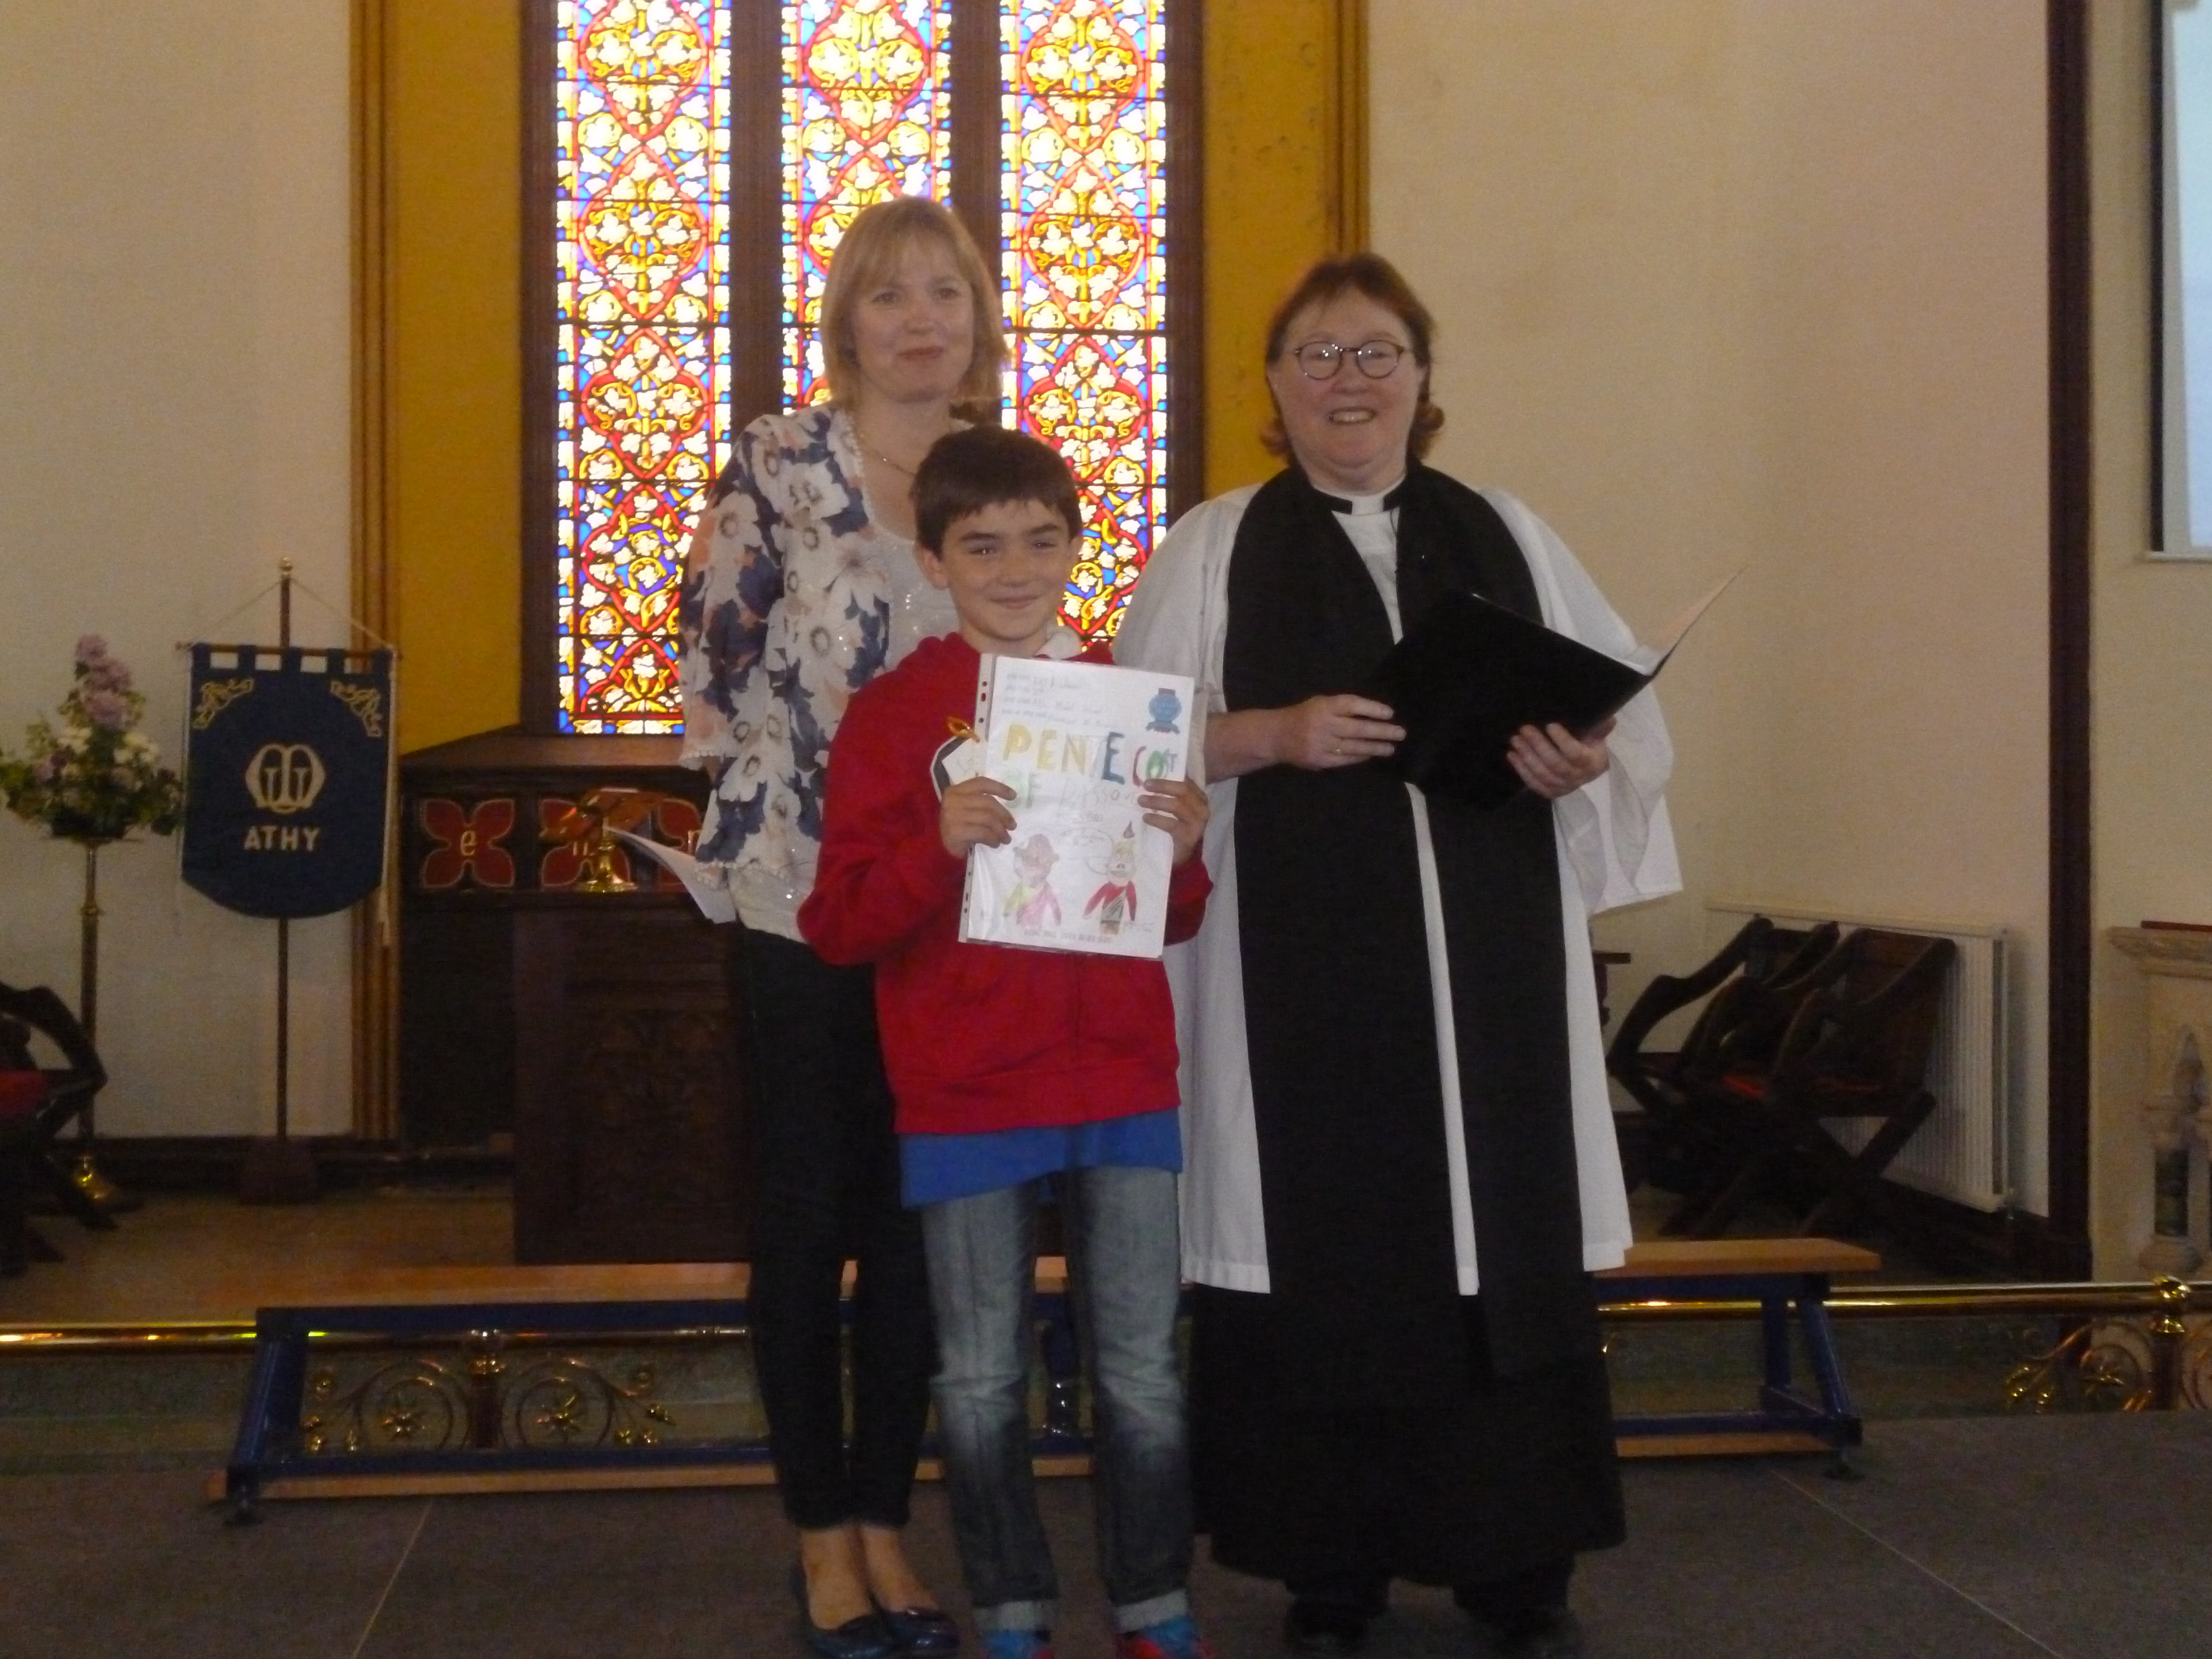 1st prize Pentecost competition